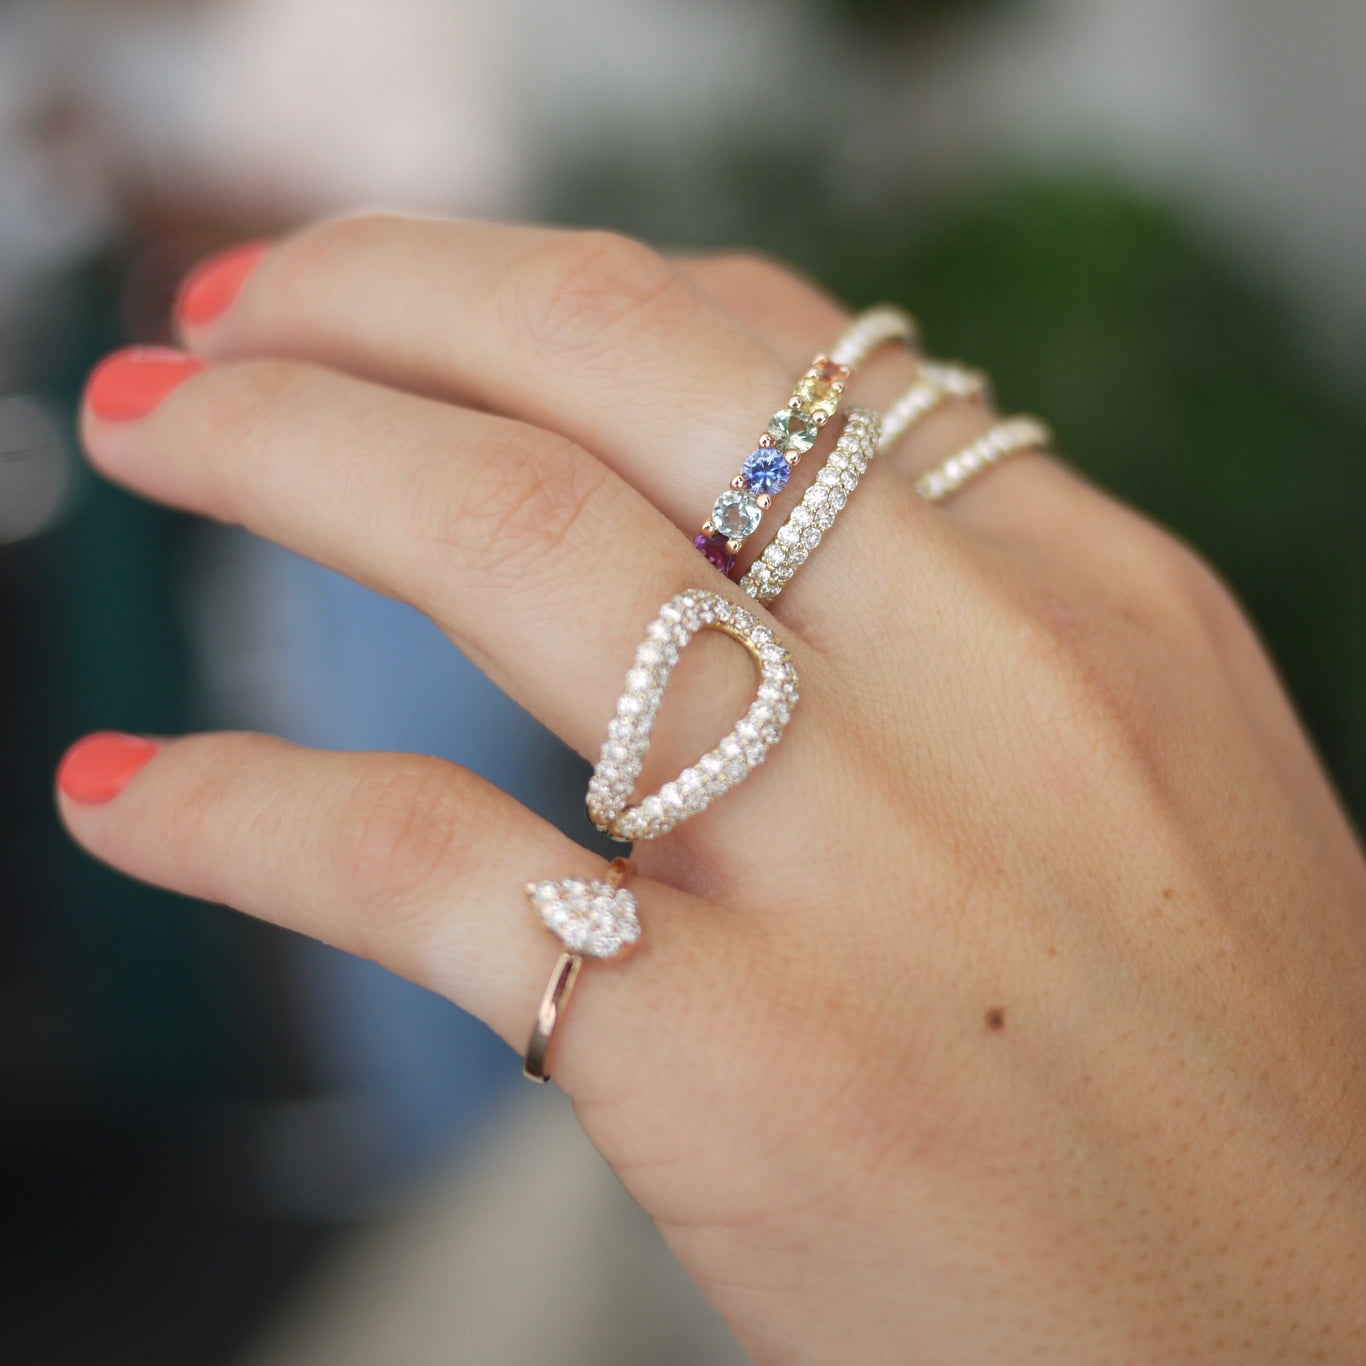 Athena Ring shown stacked below the Rainbow Eternity Band.